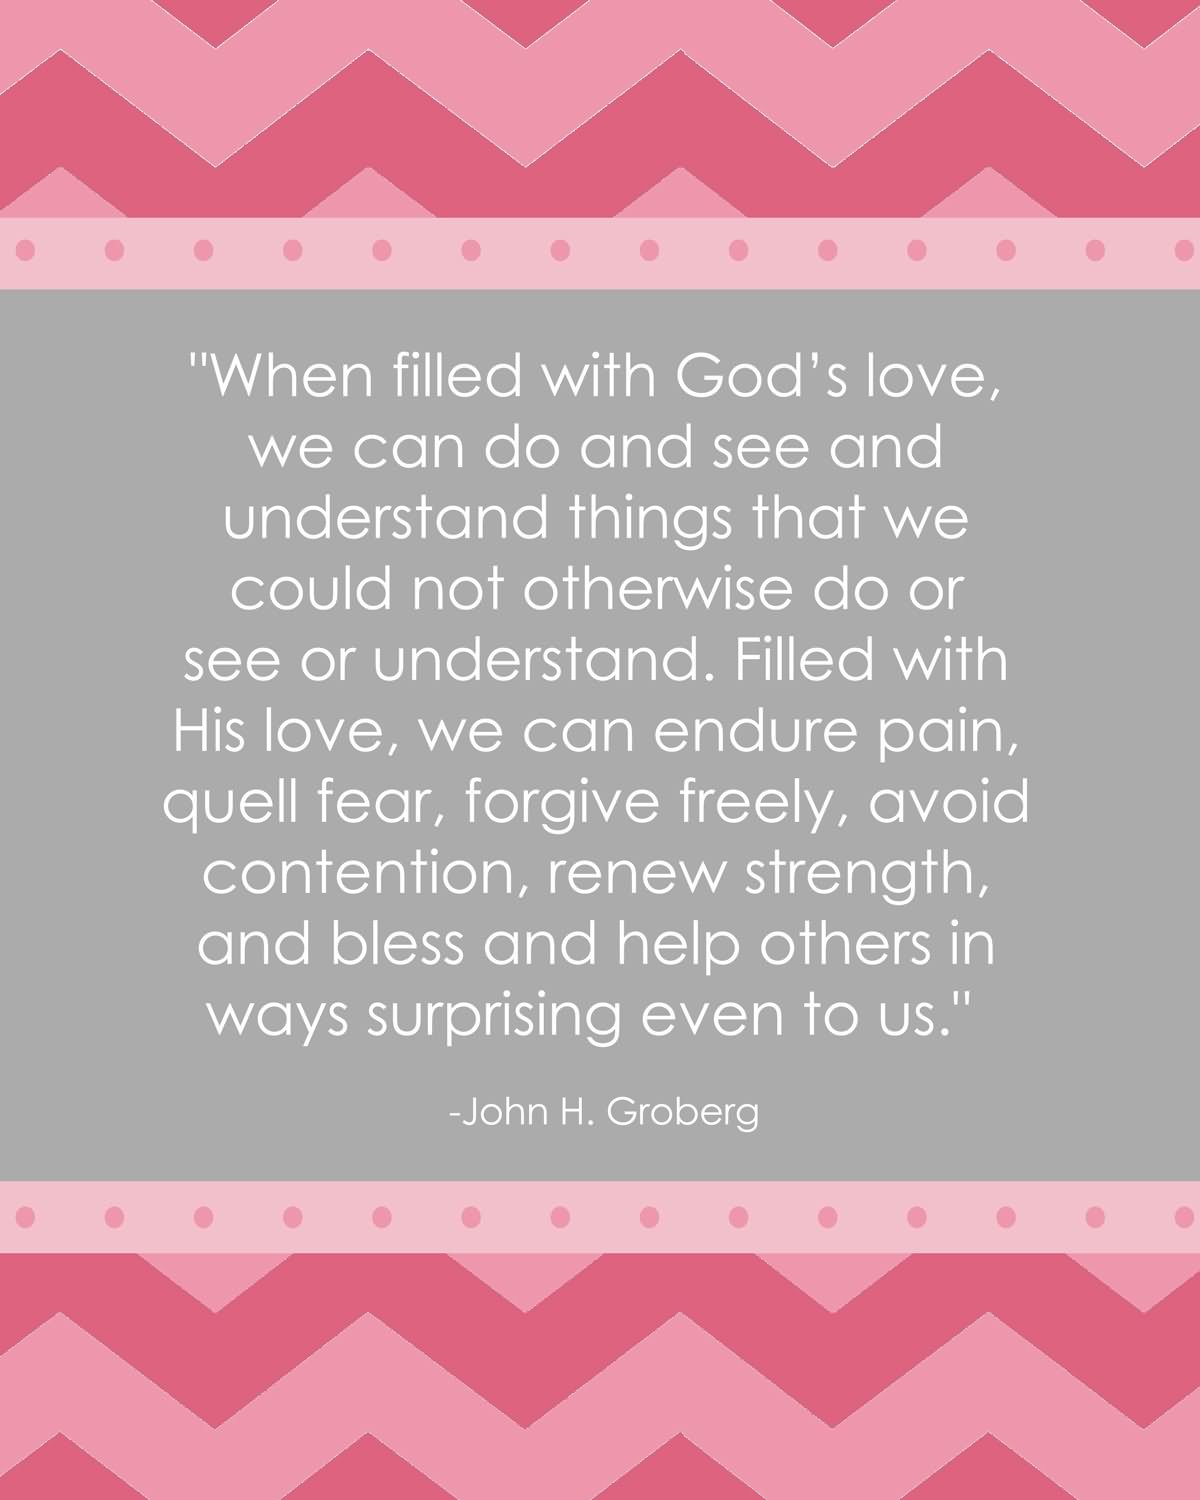 When filled with God’s love, we can do and see and understand things that we could not otherwise do or see or understand. Filled with His love, we can endure pain, quell fear, forgive freely, avoid contention, renew strength, and bless and help others in ways surprising even to us. - John H. Groberg